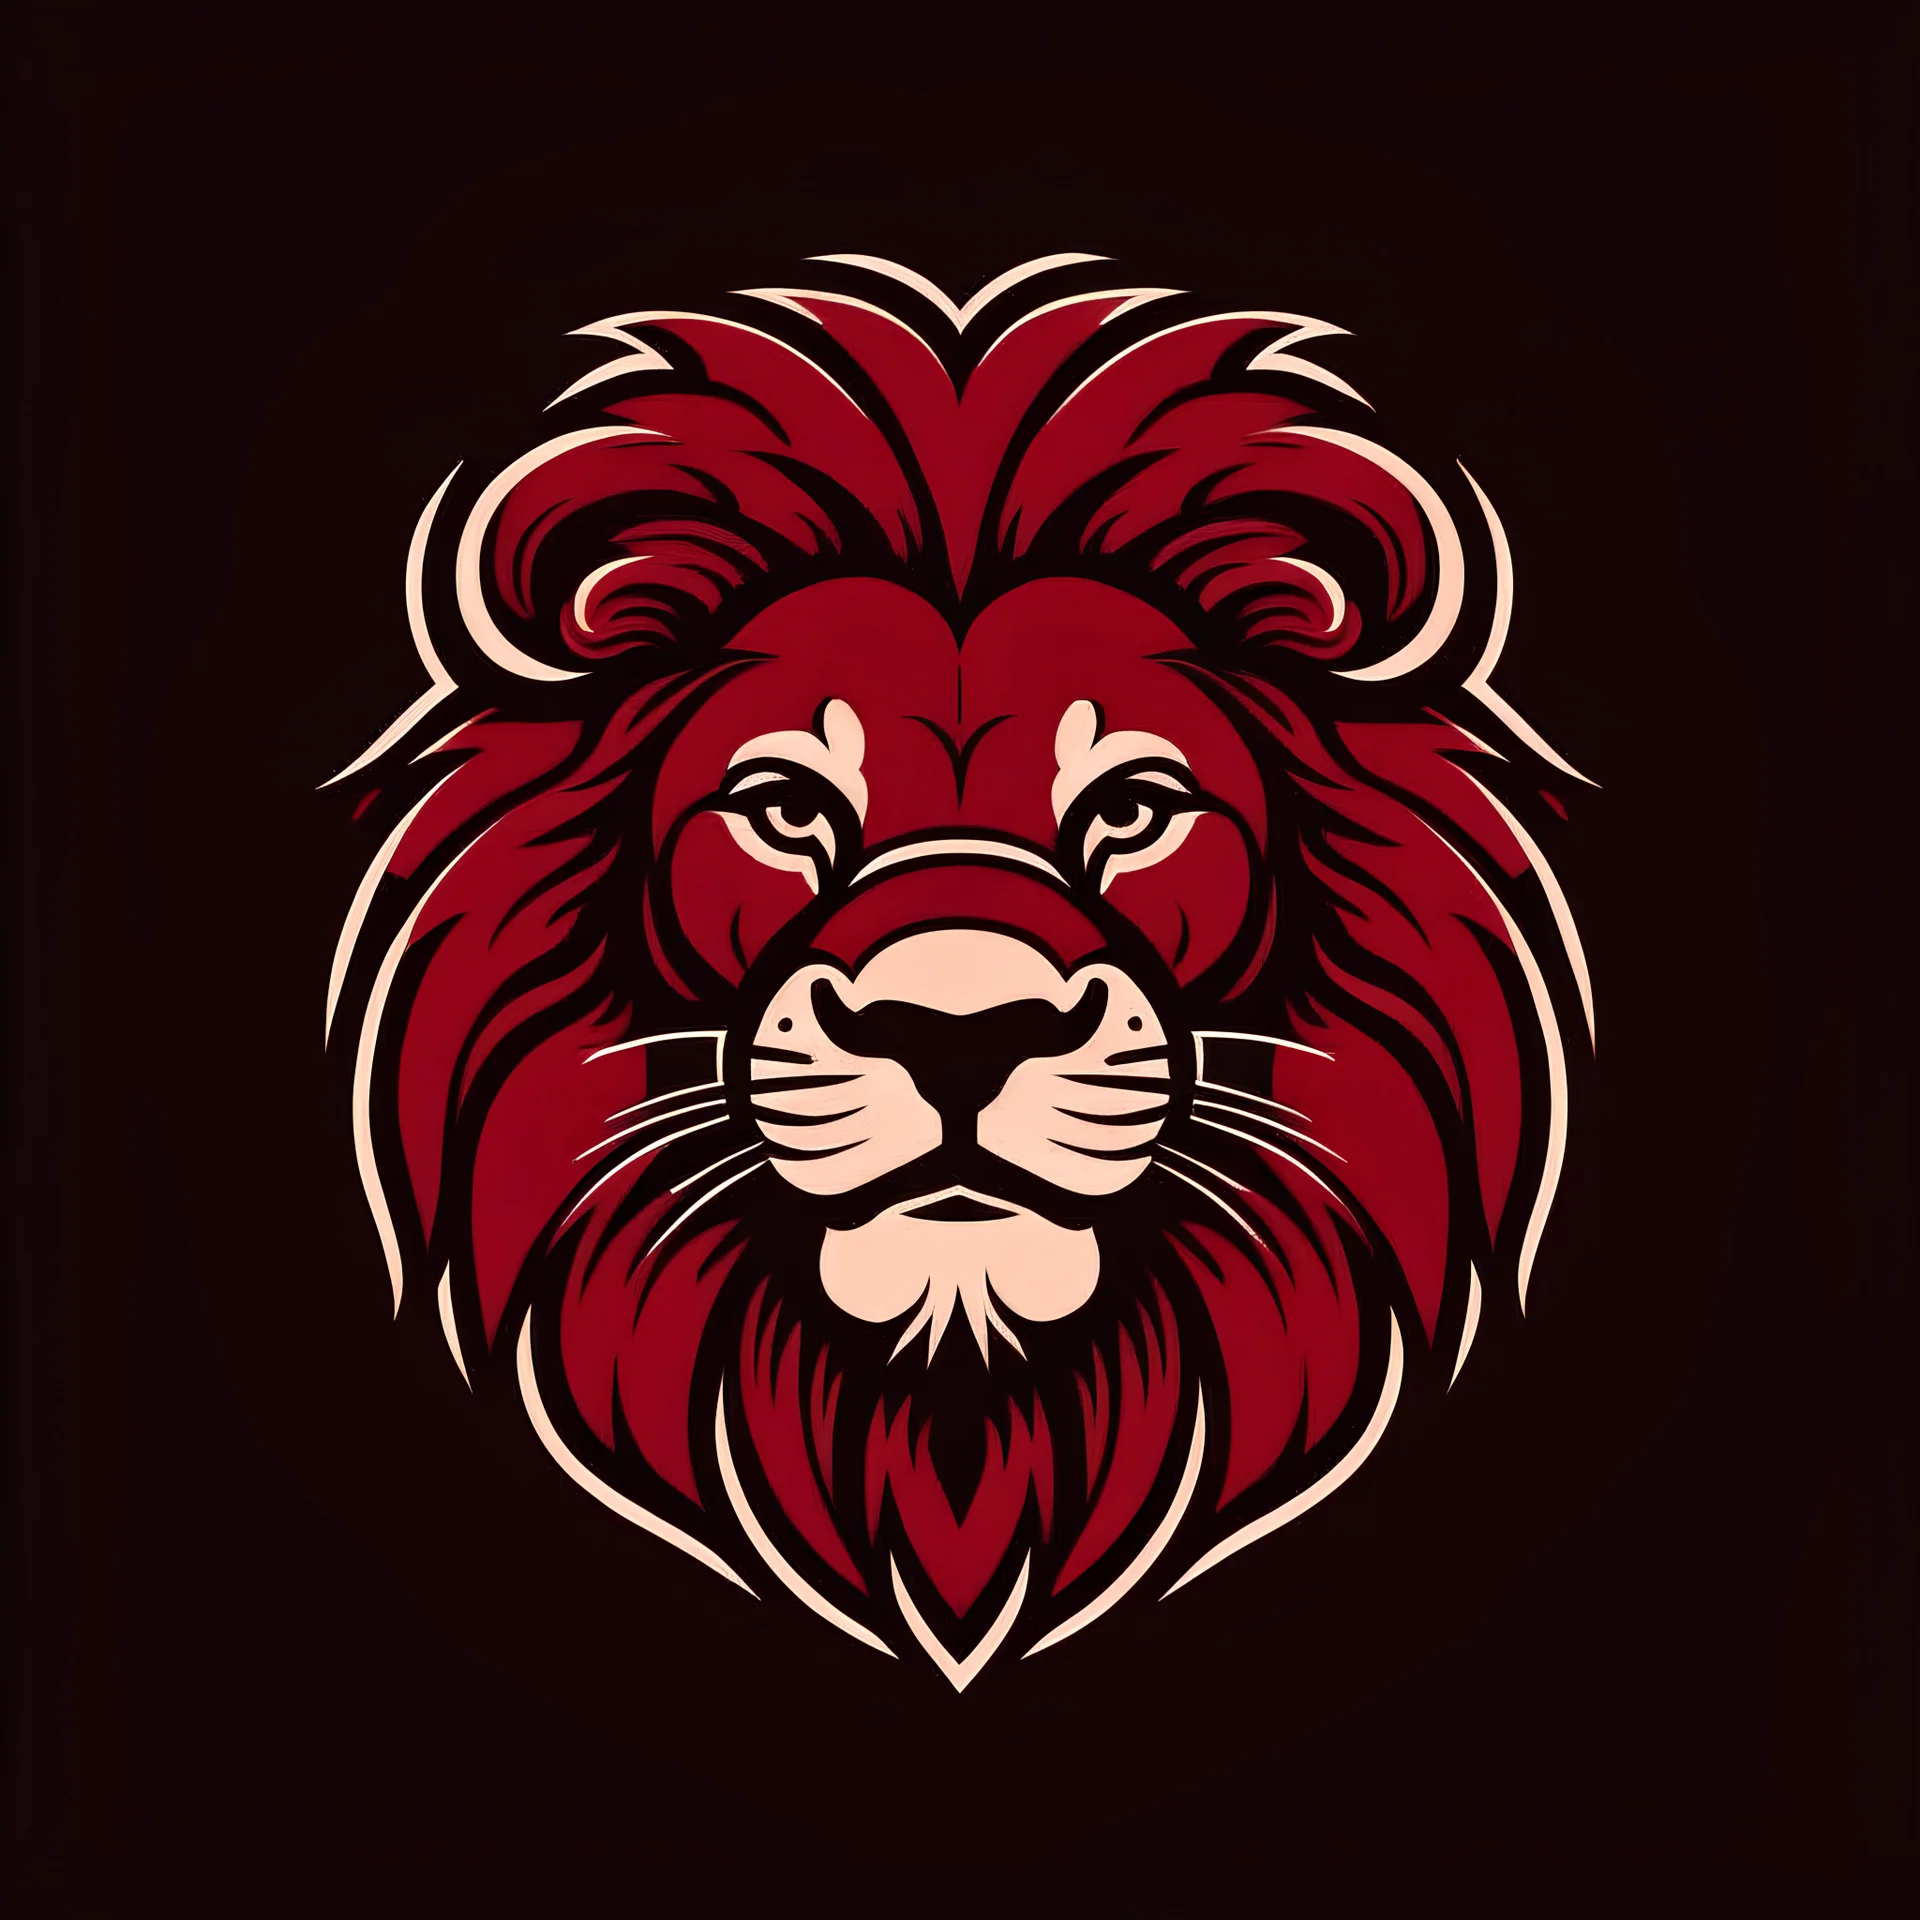 king logo lion dark red with number 3239 on it